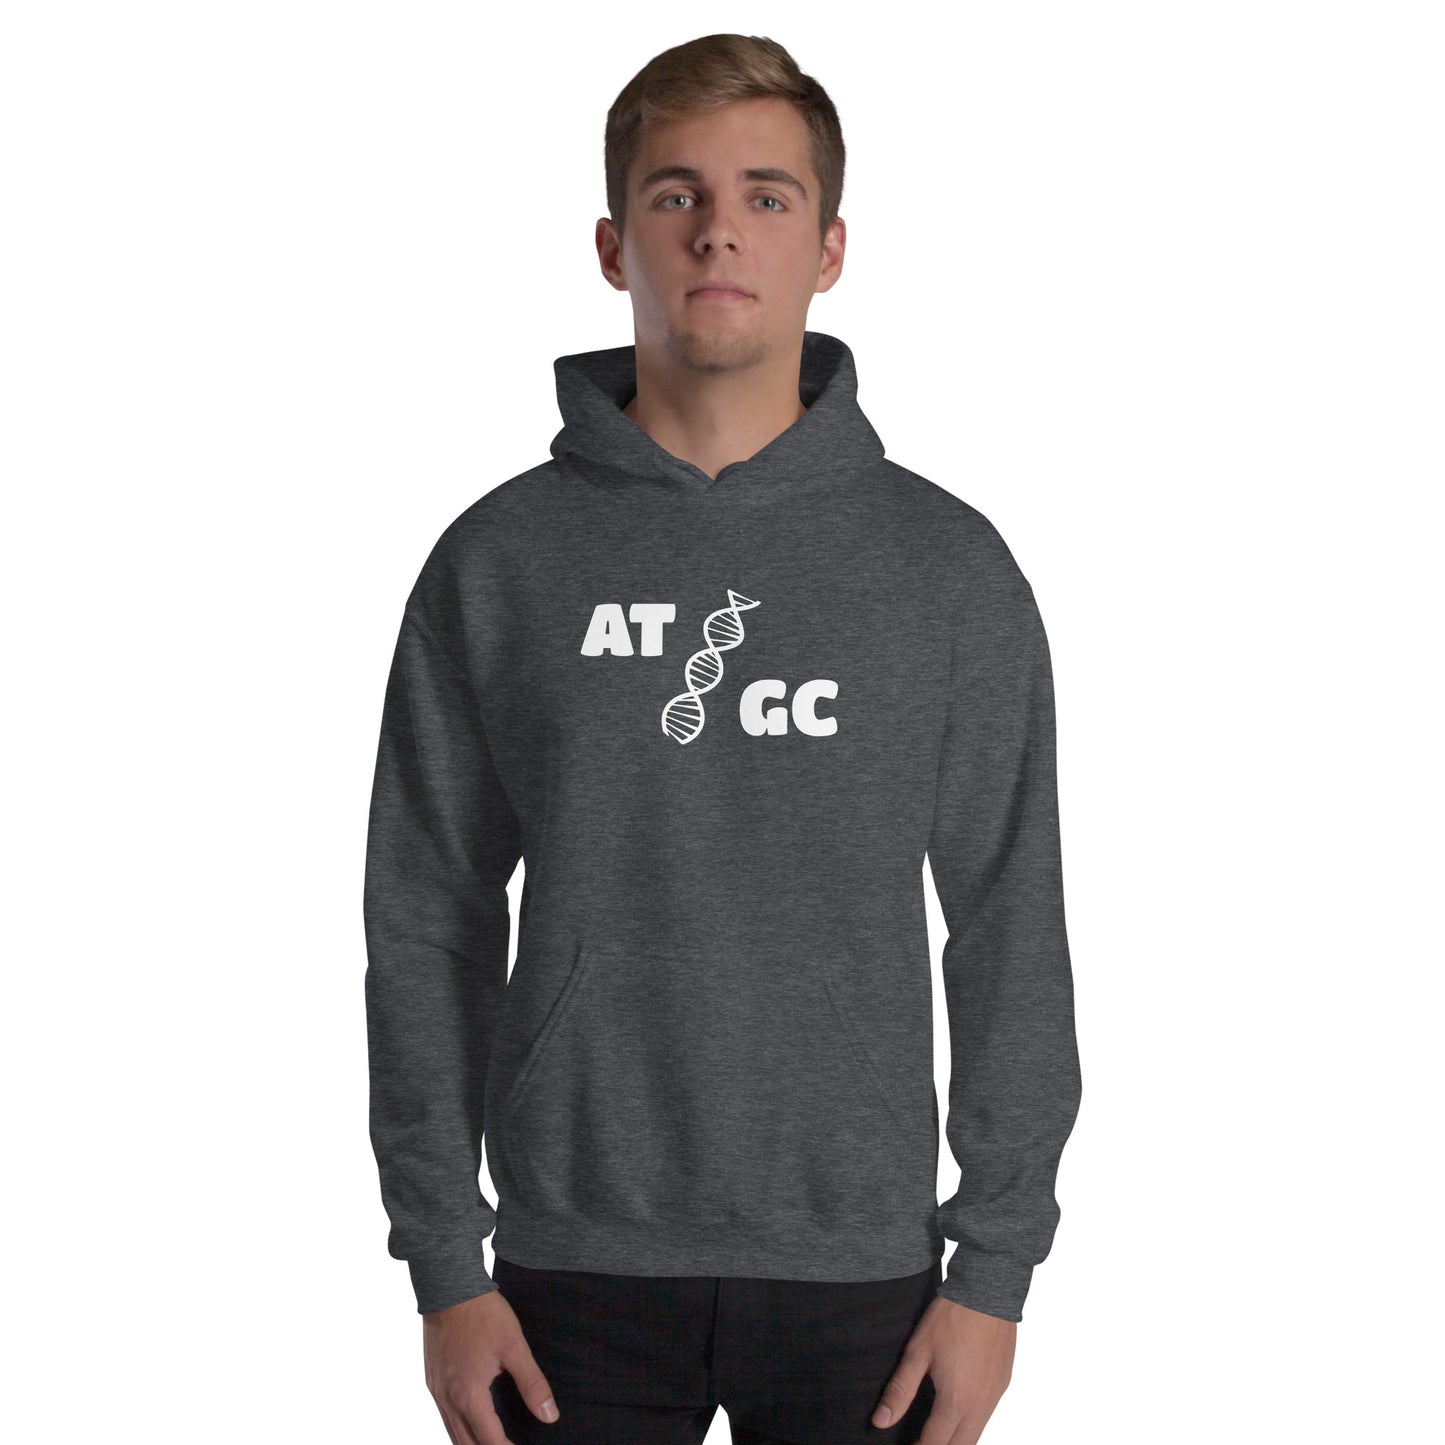 Men with dark grey hoodie with image of a DNA string and the text "ATGC"